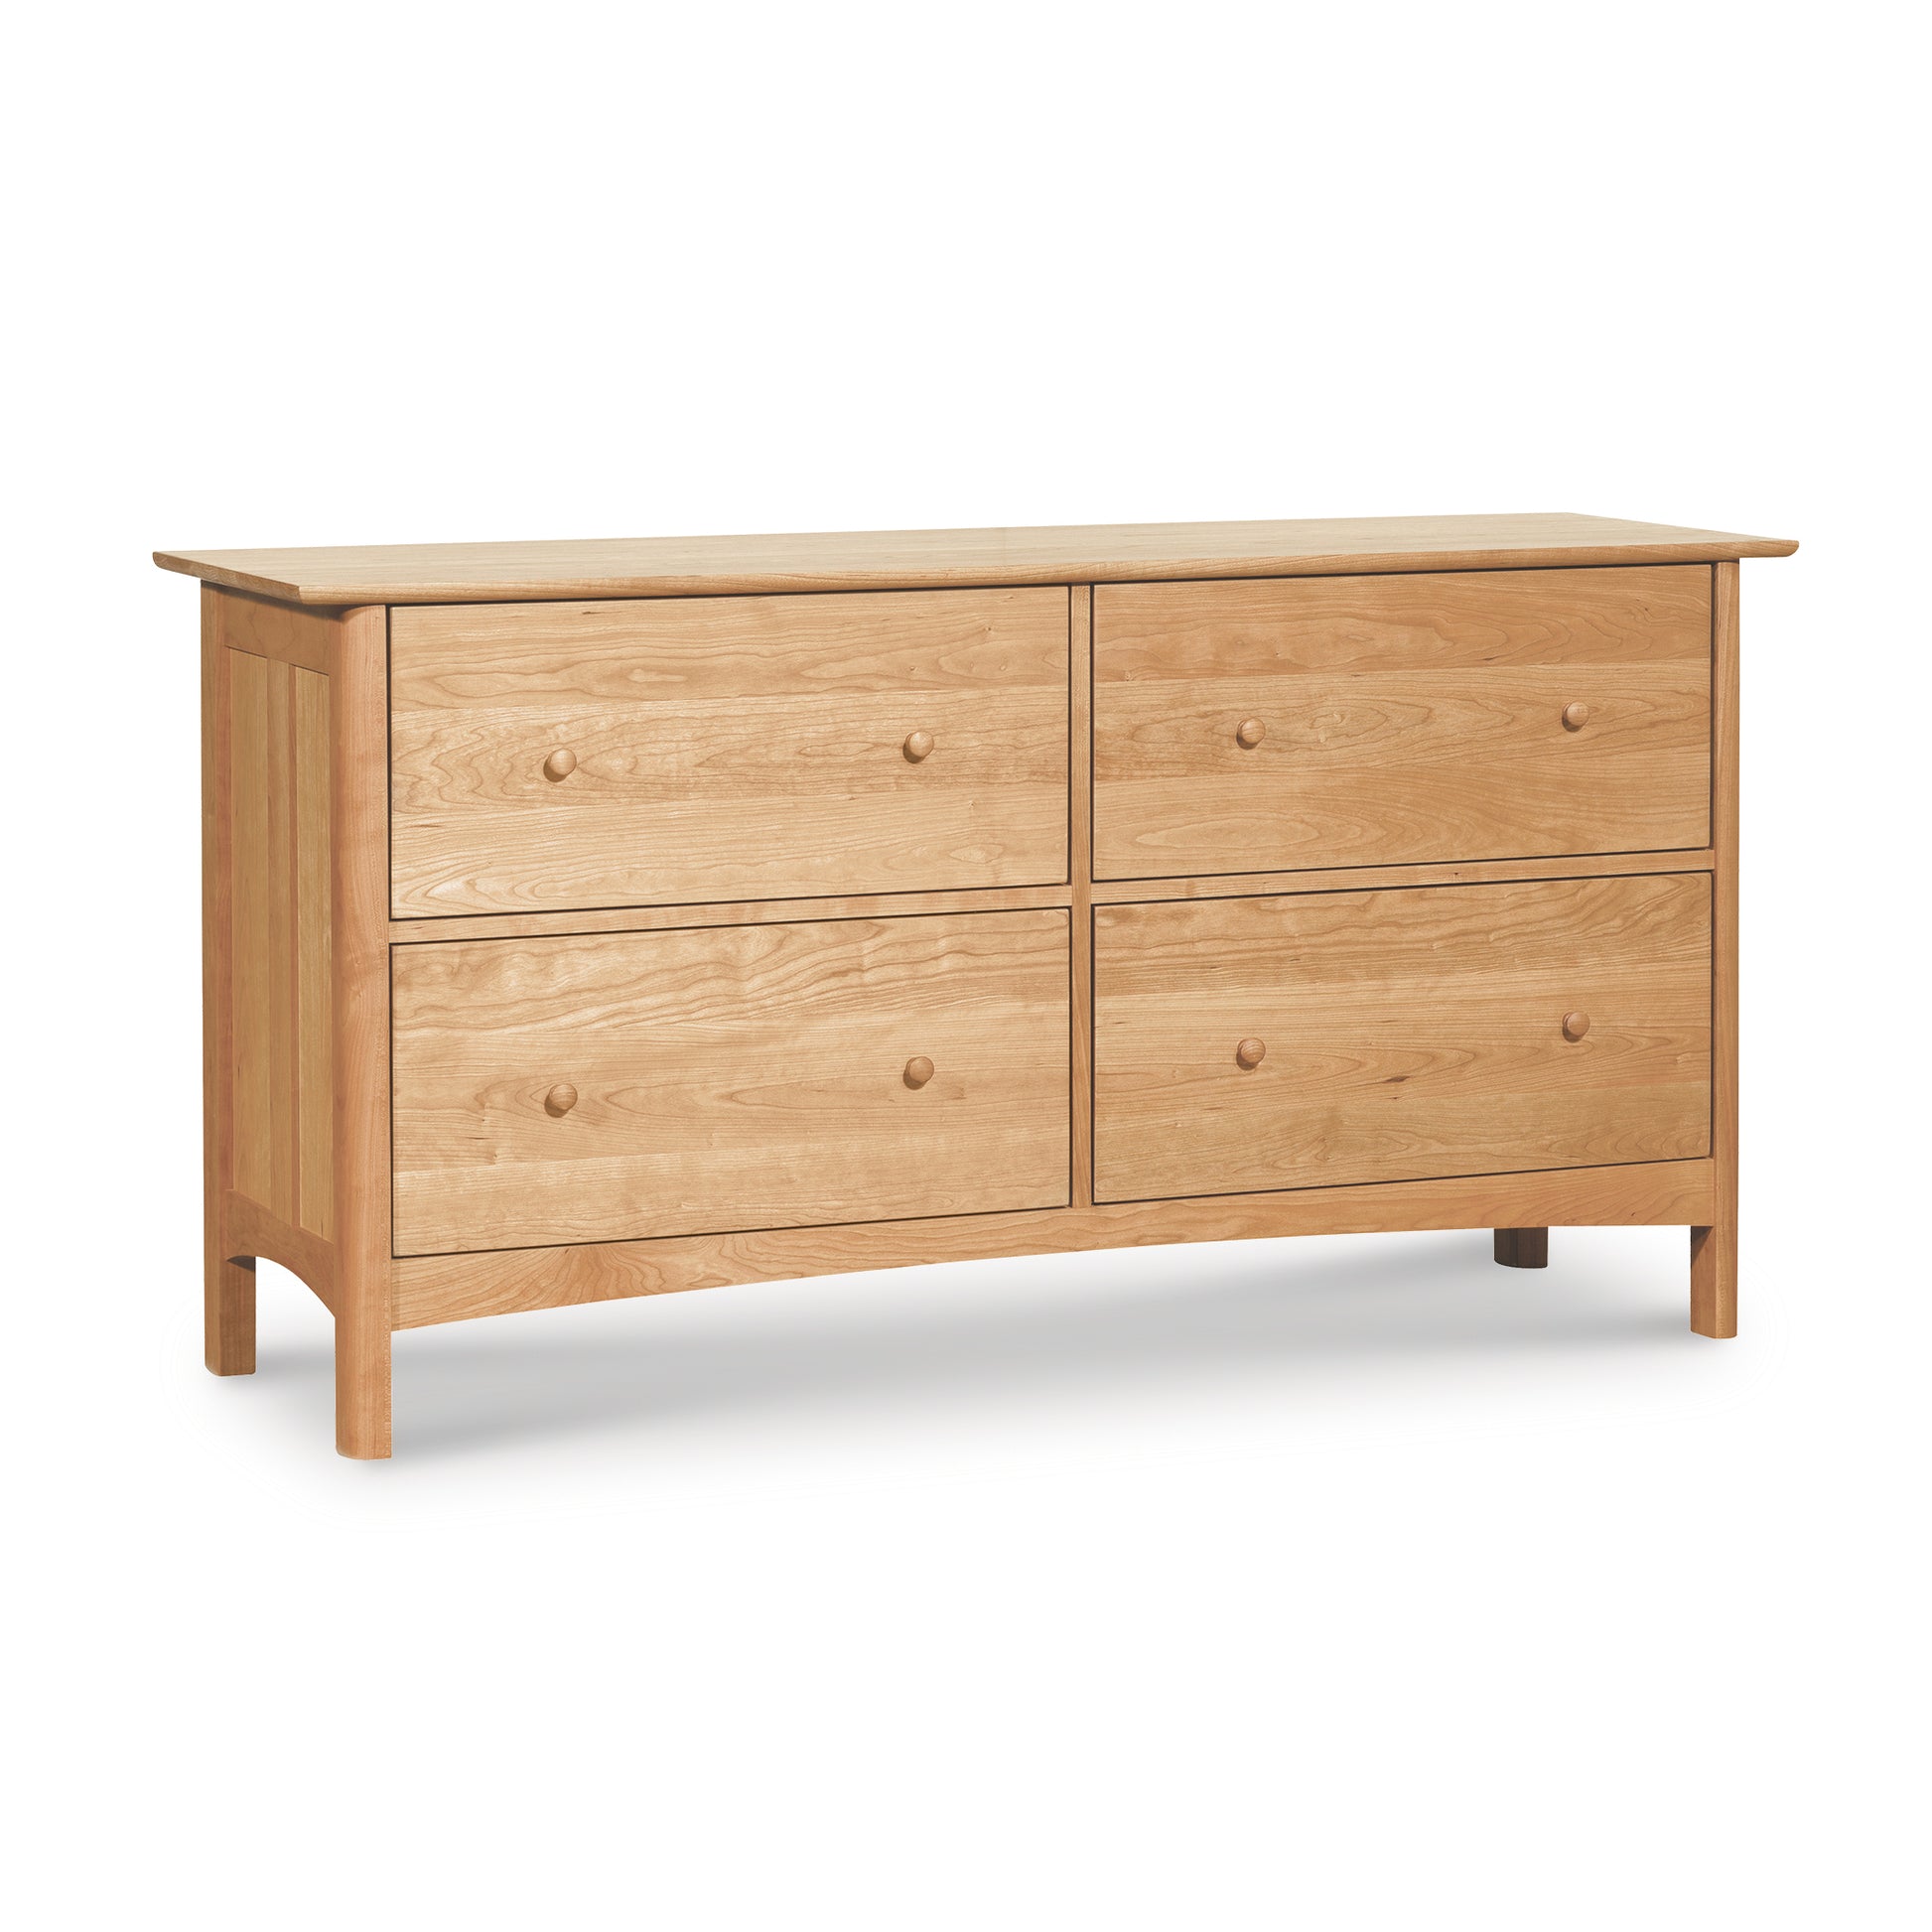 A Heartwood Shaker 4-Drawer Lateral File Cabinet by Vermont Furniture Designs against a white background.